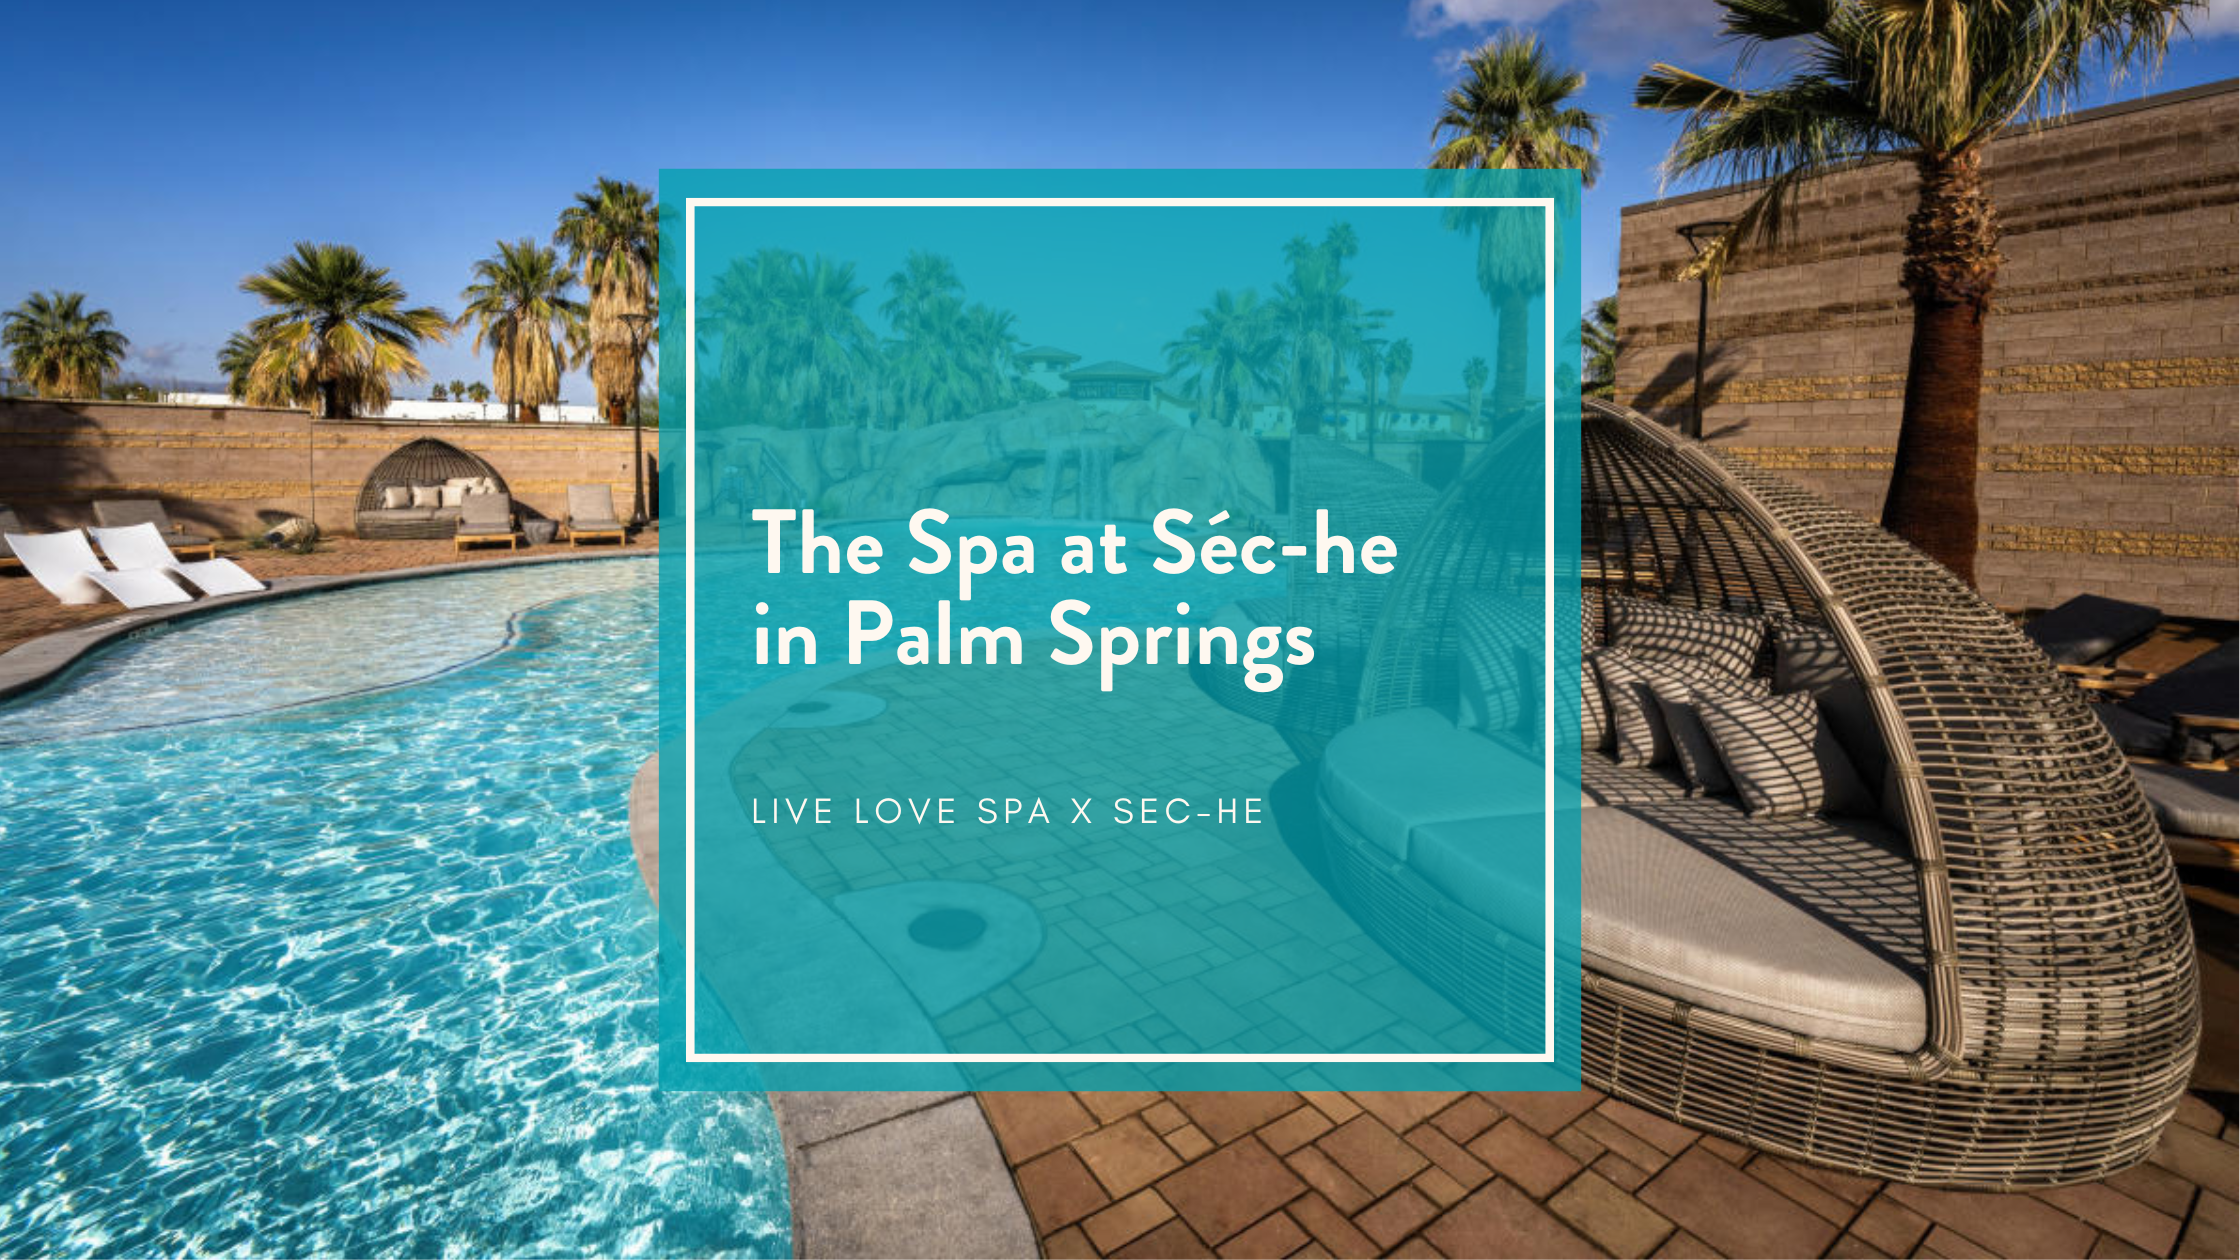 The Spa at Séc-he in Palm Springs